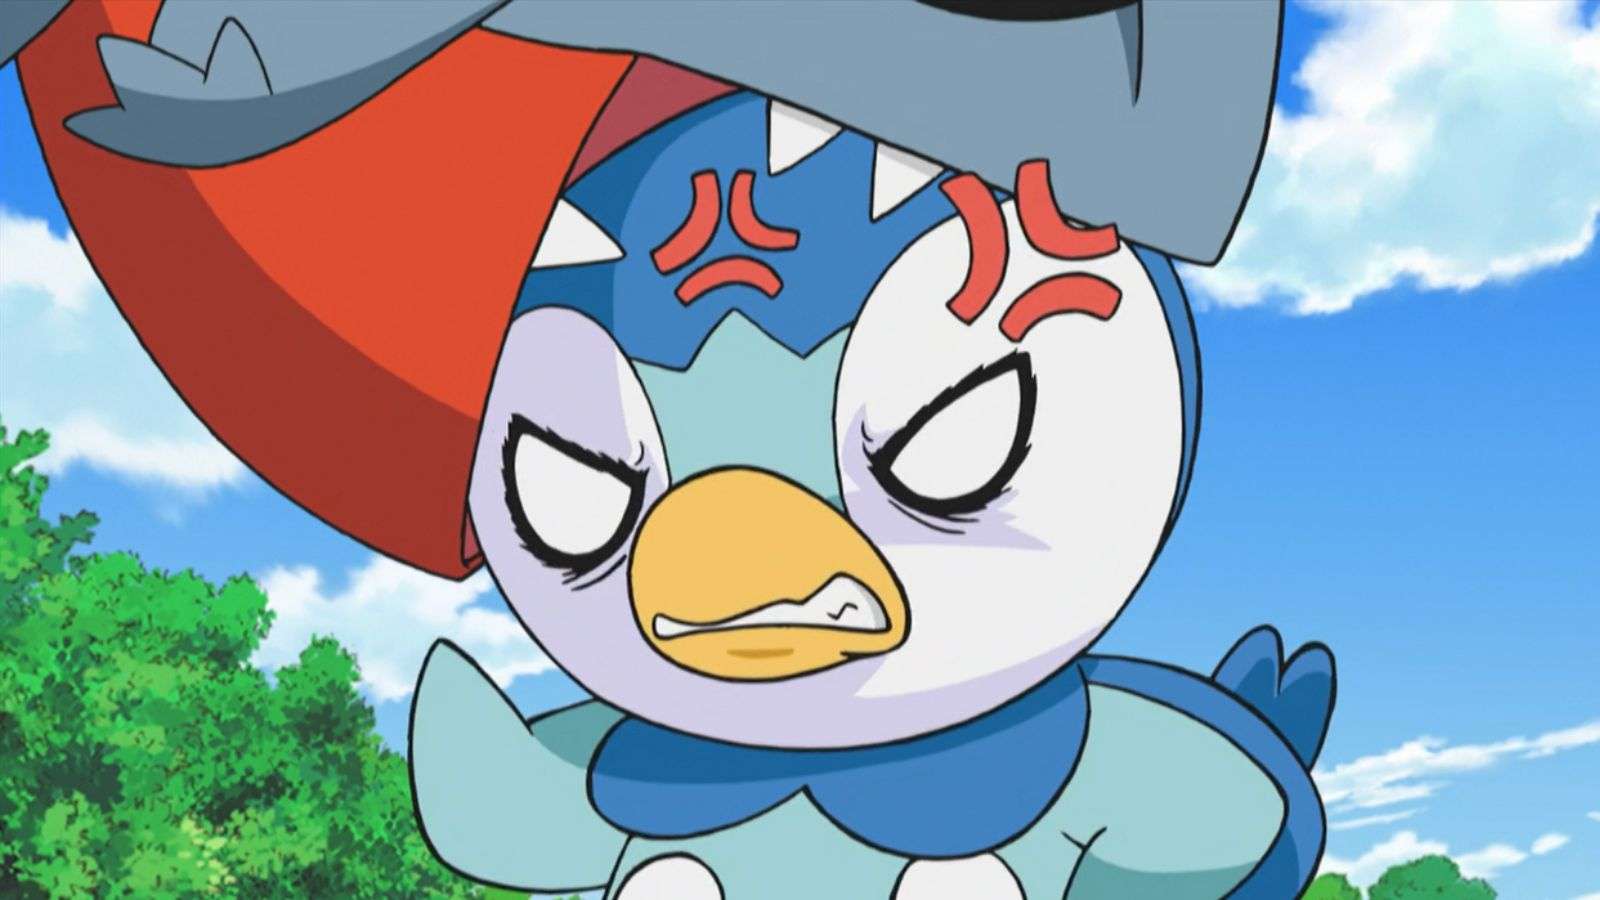 Angry Piplup getting bitten by Gible in Pokemon anime.